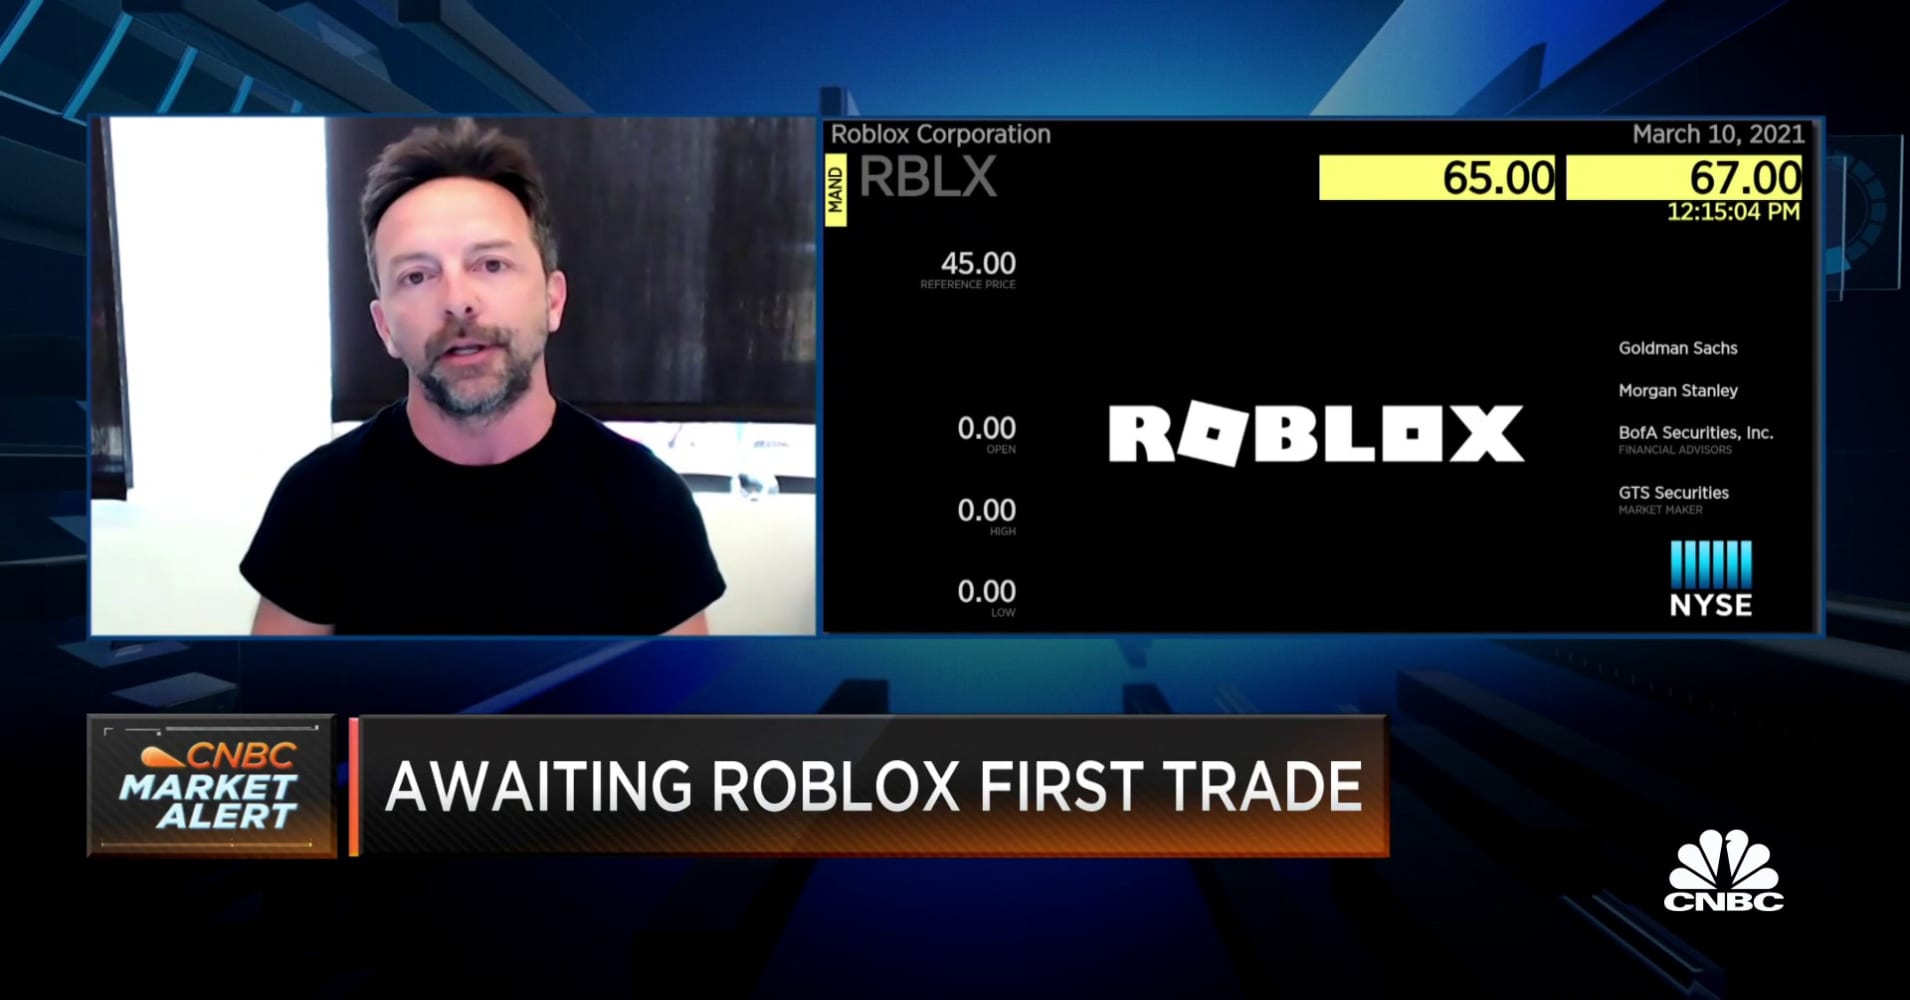 Roblox Rblx Goes Public With A Bet On The Metaverse - roblox how to get locked models